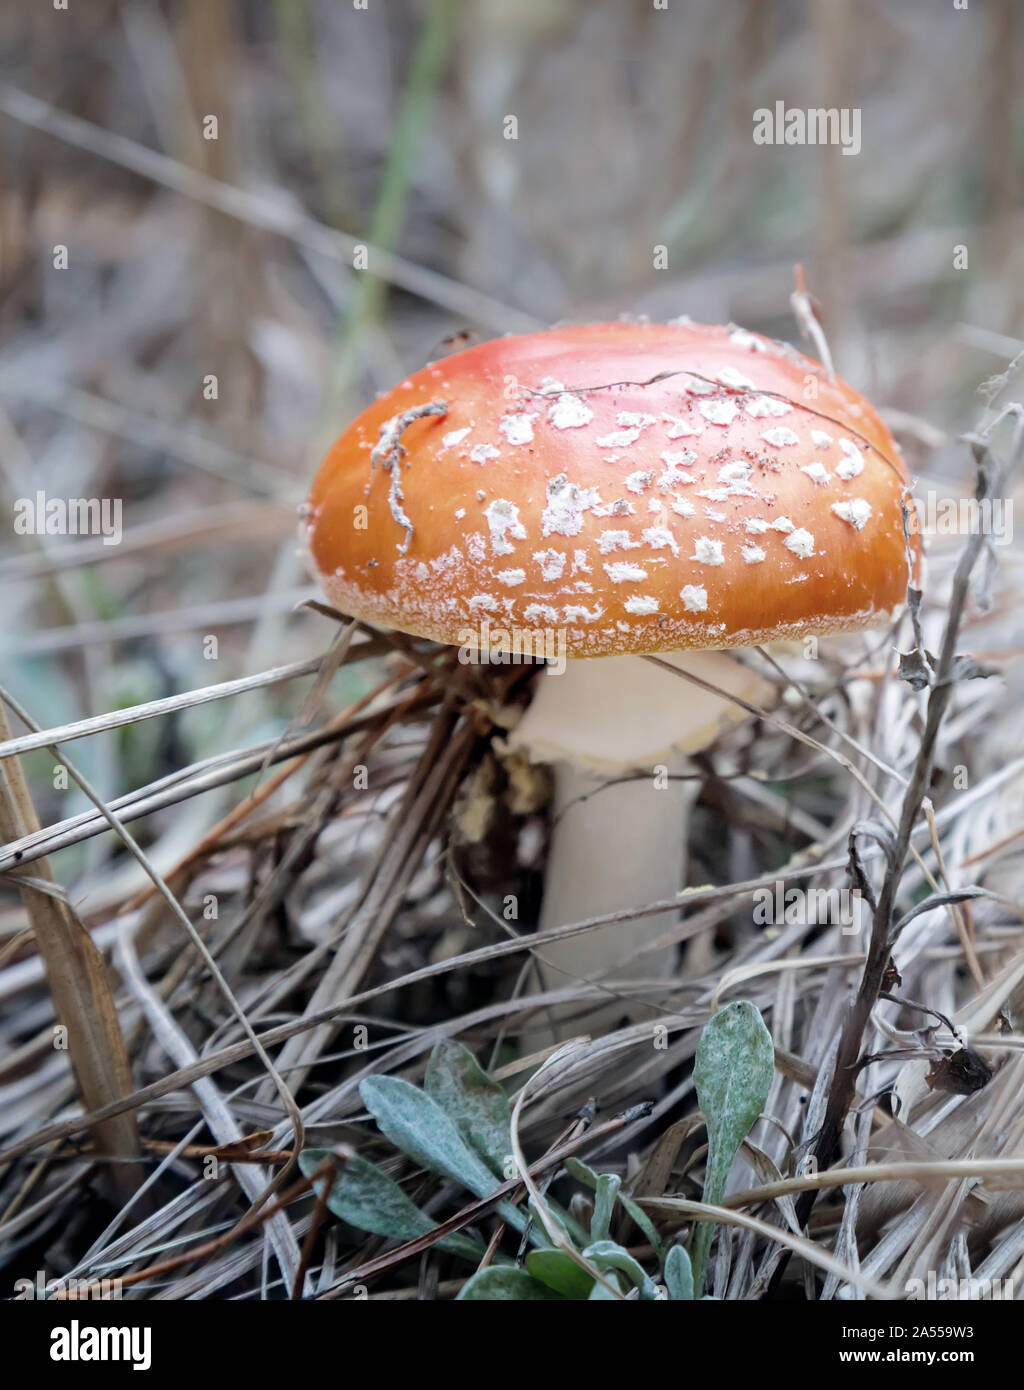 Poisonous mushroom fly agaric in a forest clearing. Stock Photo